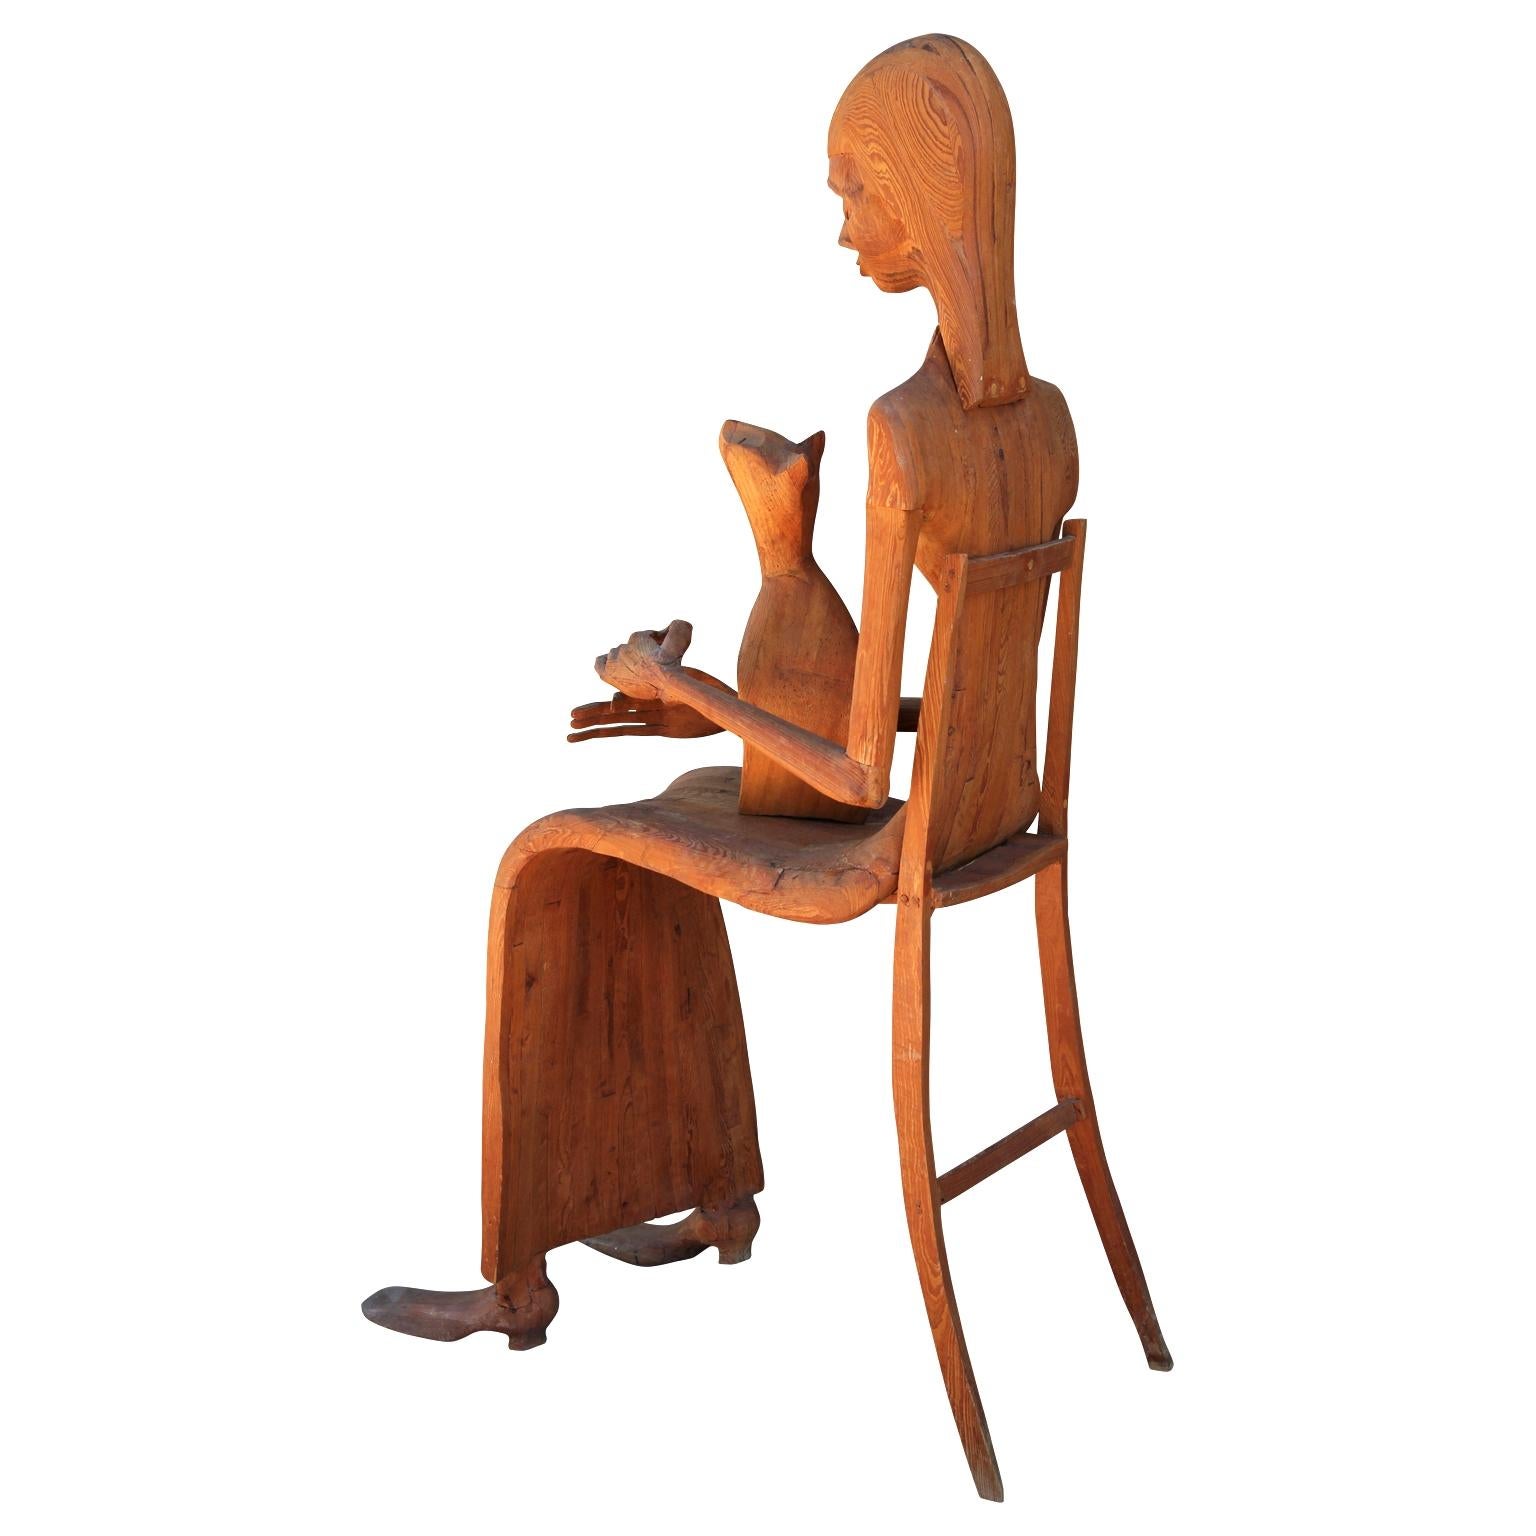 Hand carved wooden sculpture of a seated woman in a chair with a pet cat in her lap. The work features intricately carved facial features, elongated fingers, and the illusion of a separate chair. Created in the style of Marion Perkins, an iconic